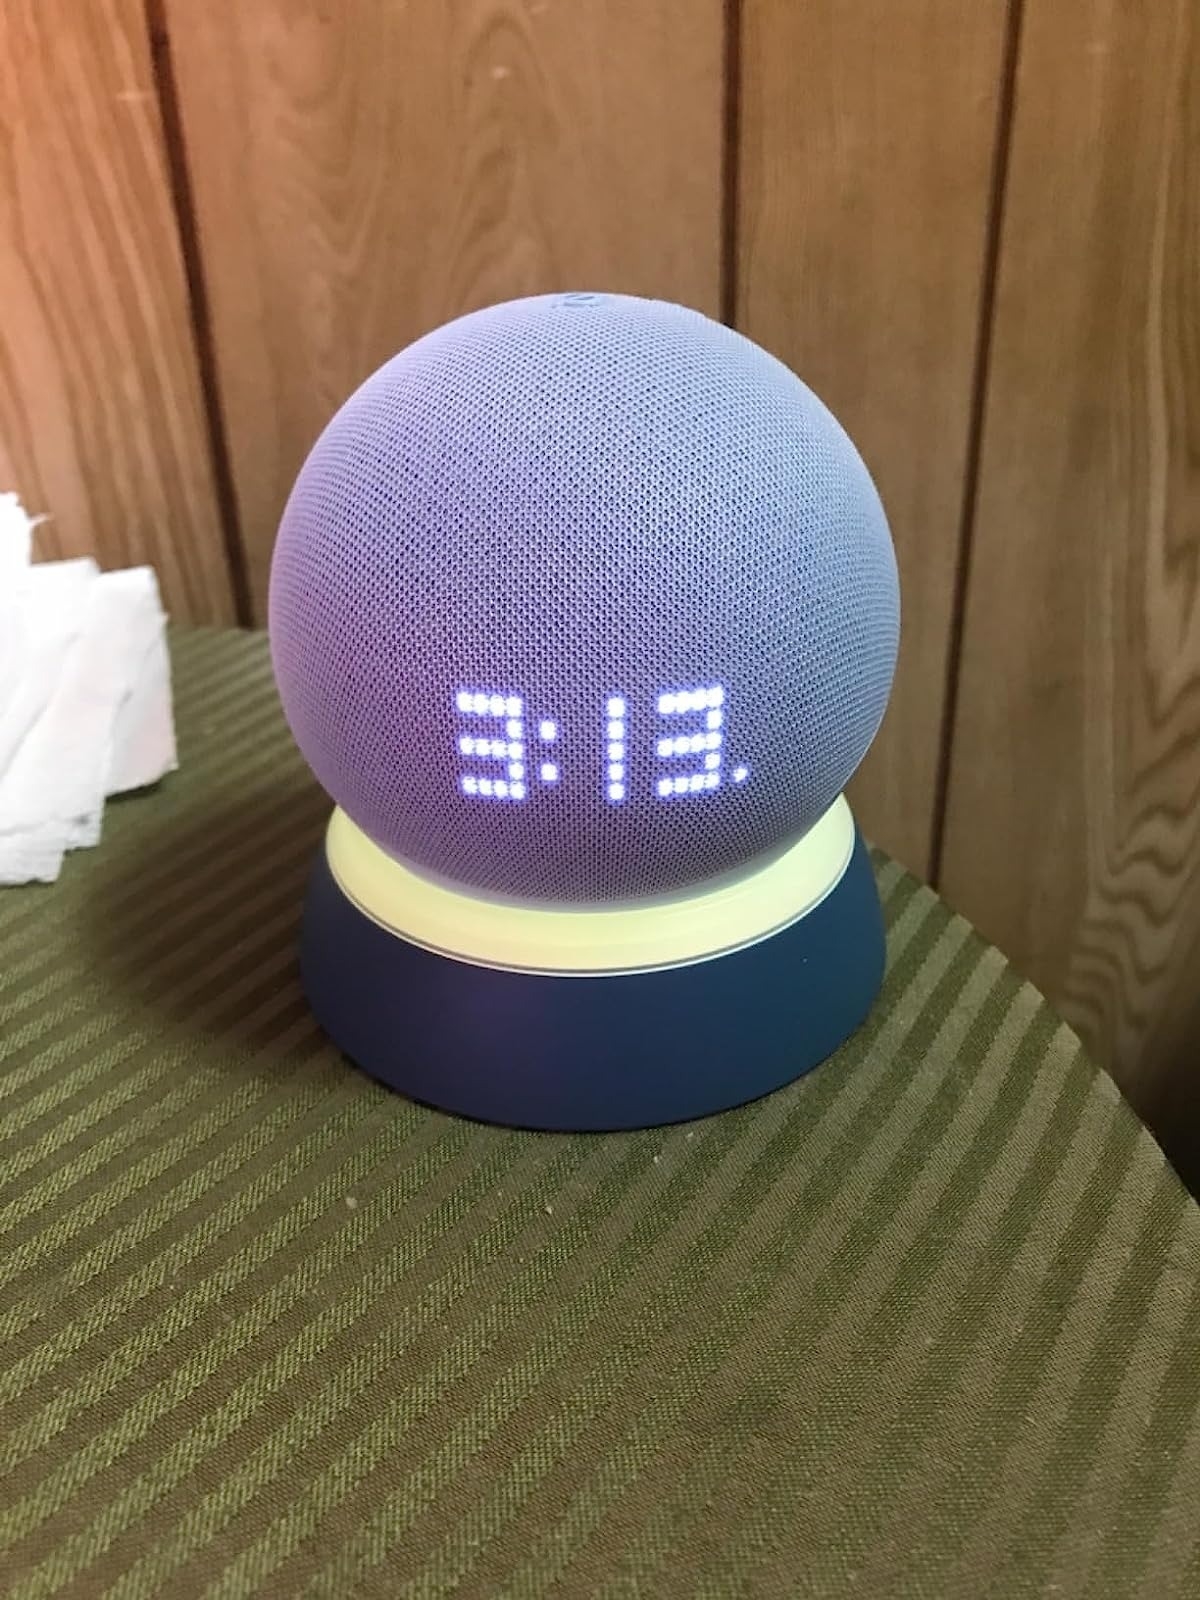 reviewer image of the echo dot displaying the time as 3:13